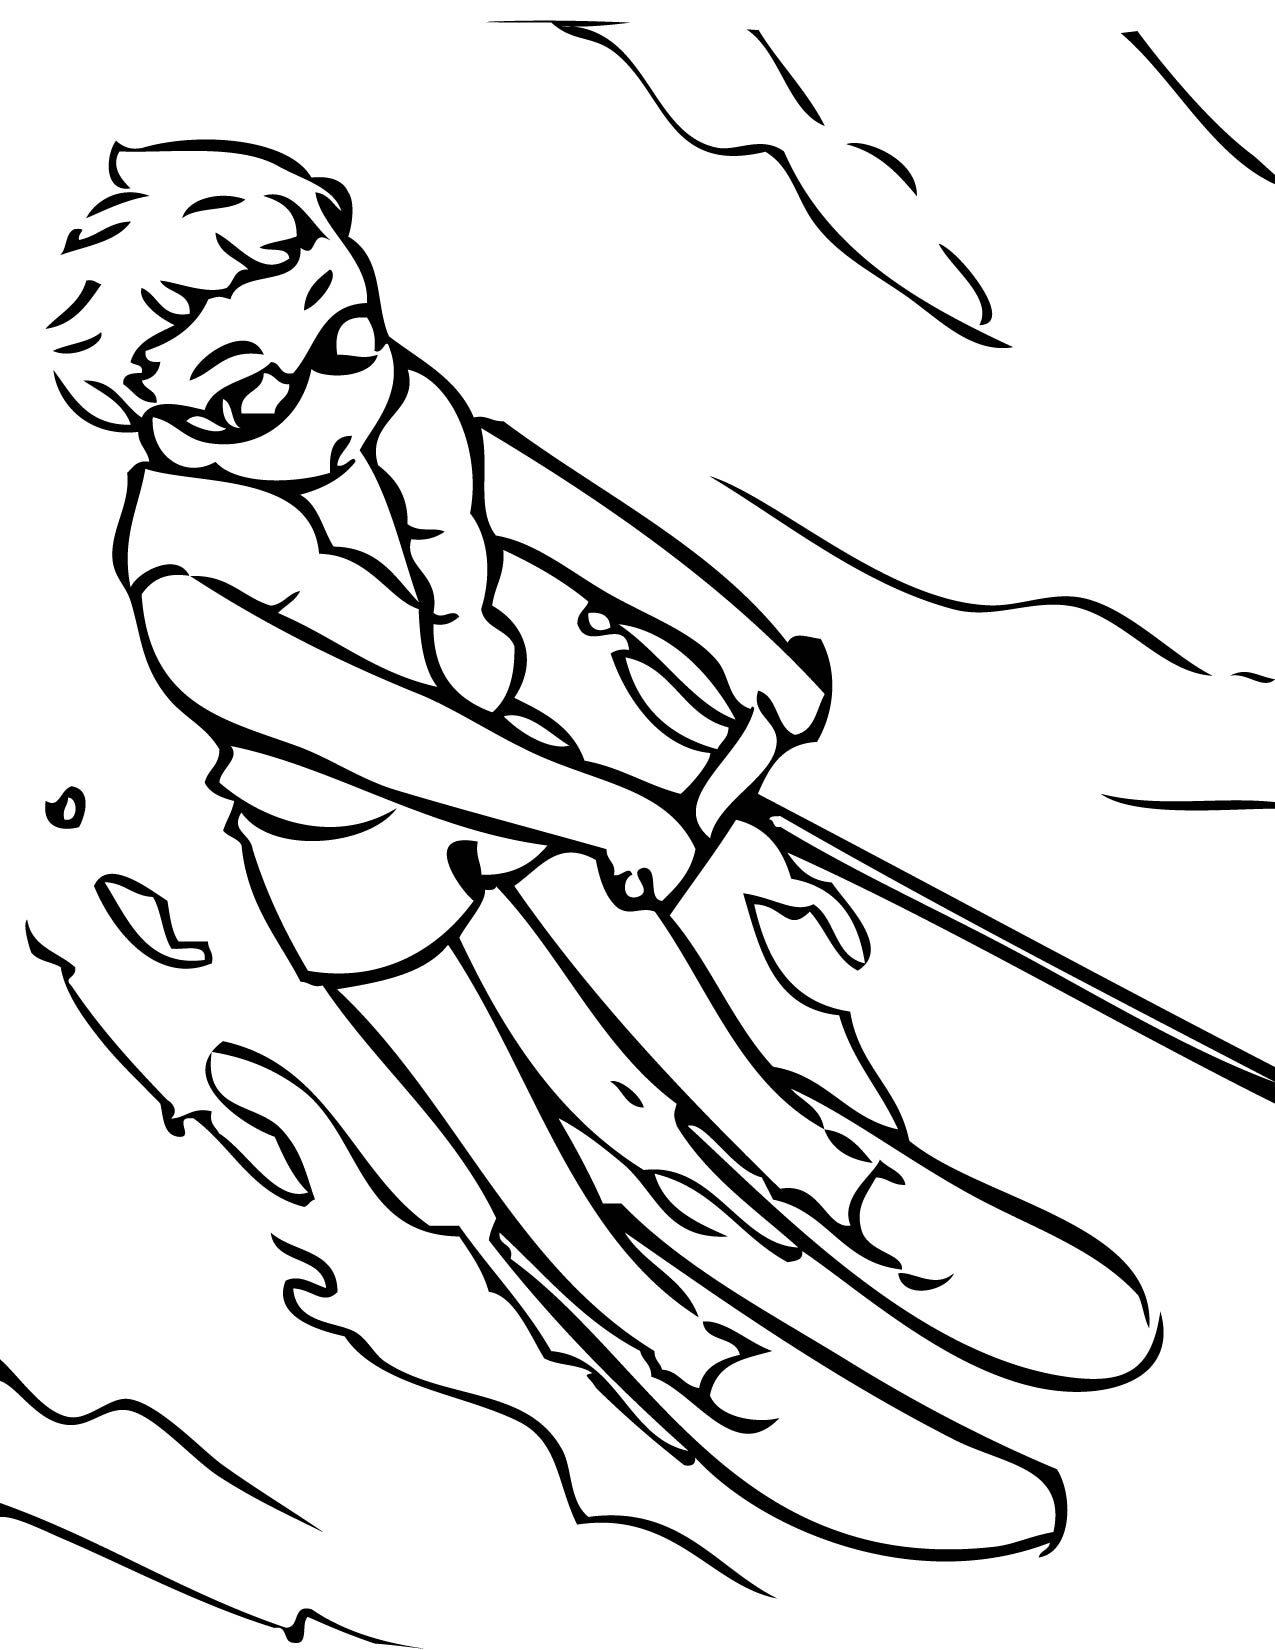 Kids Fun Coloring Water Skiing Waterskiën Boat Boat Coloring Pages Coloring  page digger colouring pictures circle time games apple coloring easy  construction paper crafts for toddlers easy arts and crafts for toddlers